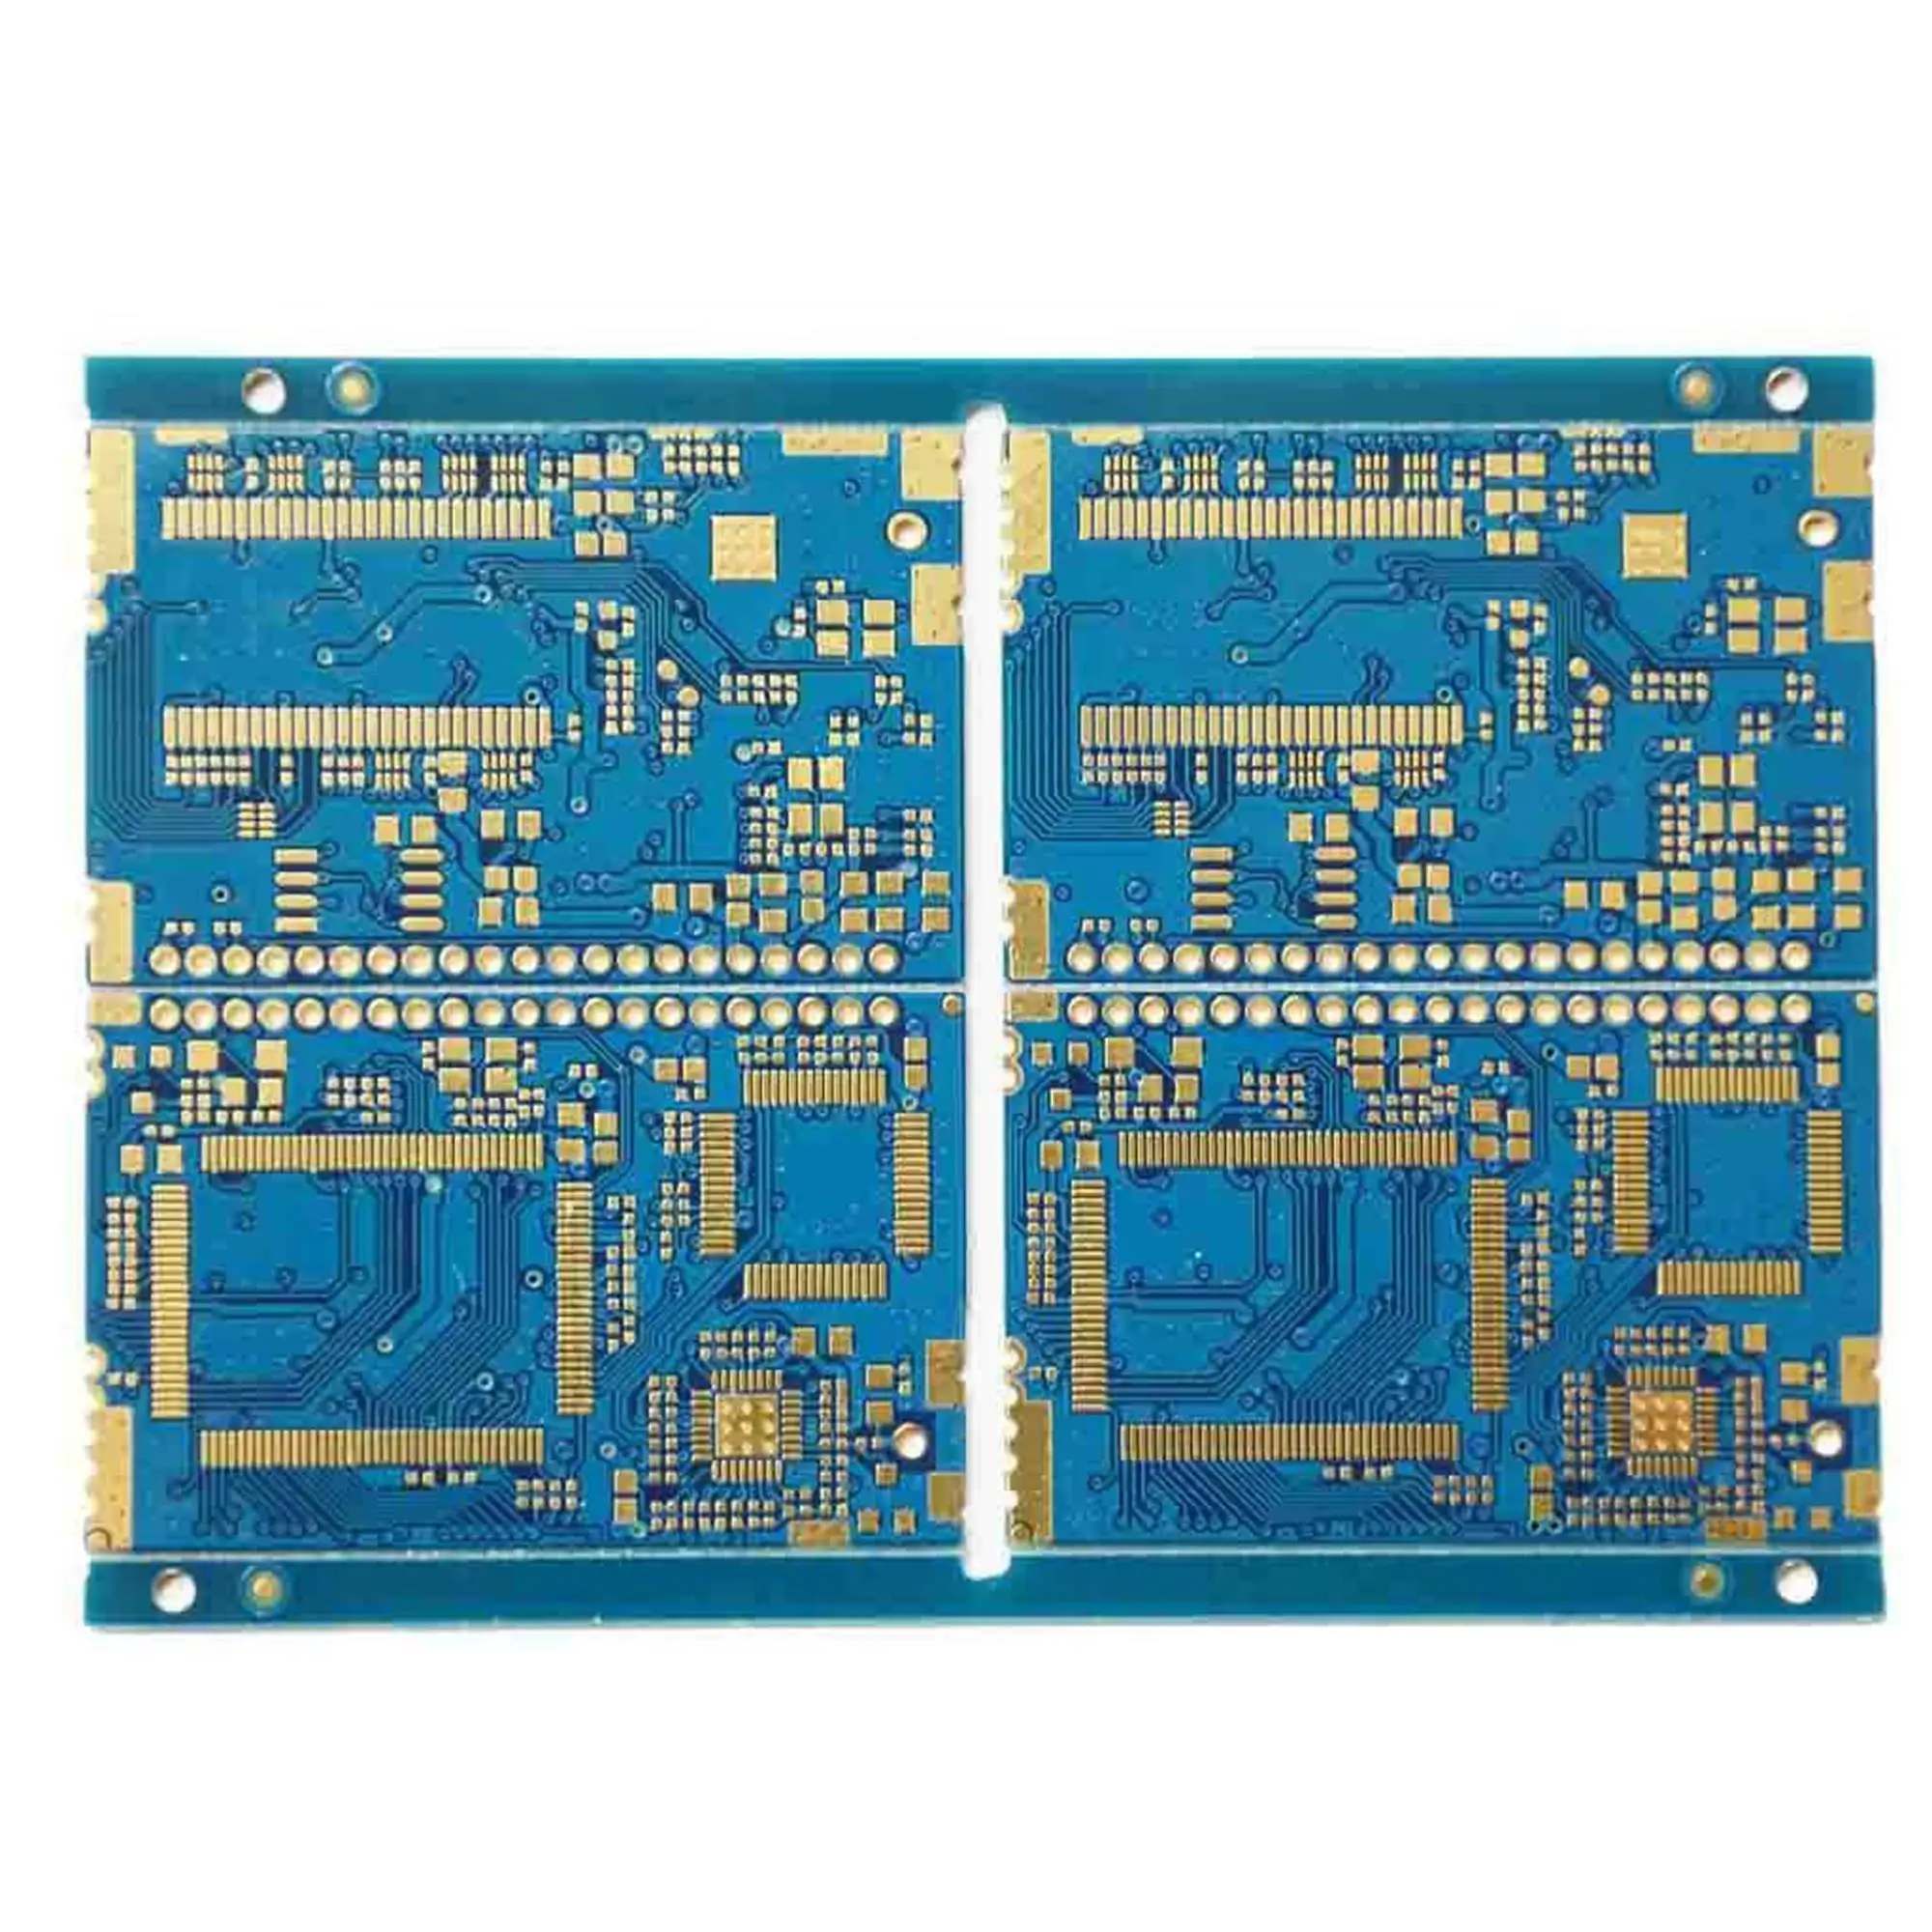 Fastest lead-time rigid 2-layer printed circuit boards no urgent costs pay competitive price for pcb supplier | Электронные